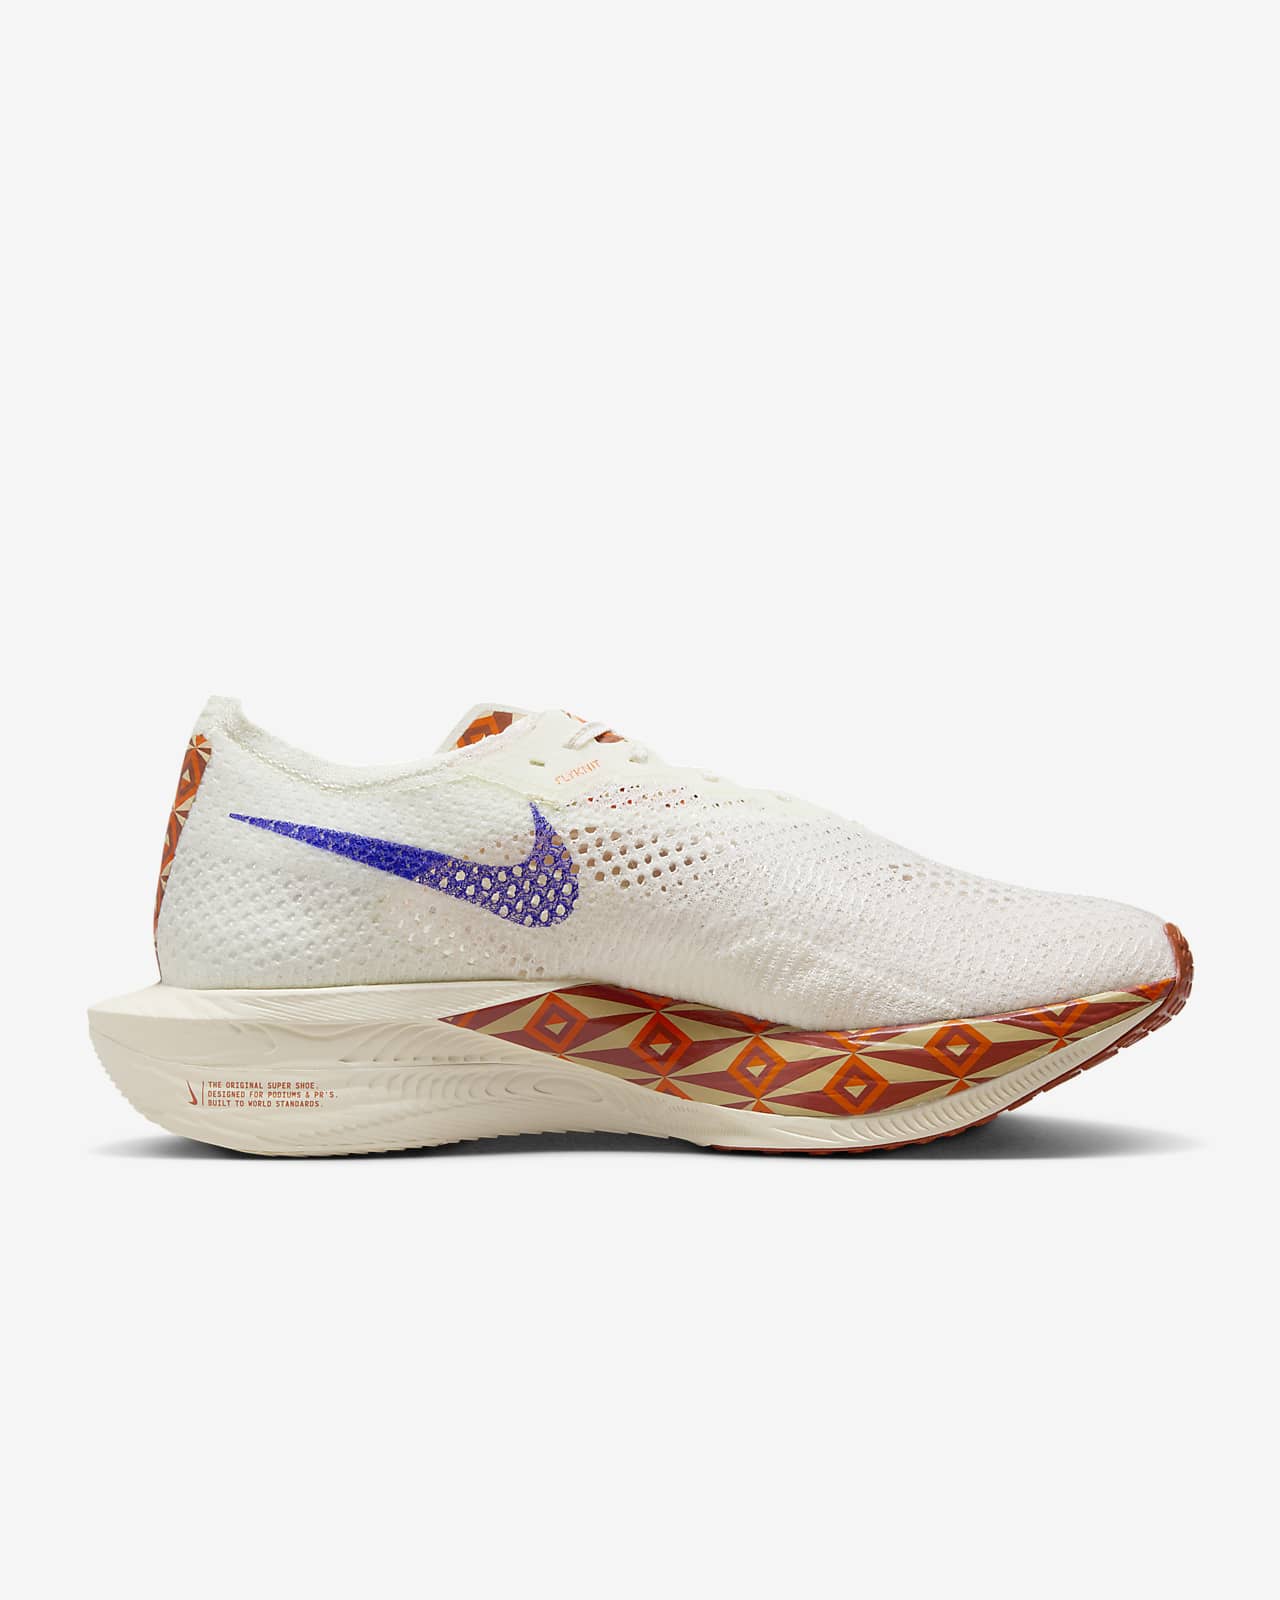 Nike Zoom Fly 3 Premium By YouNBY